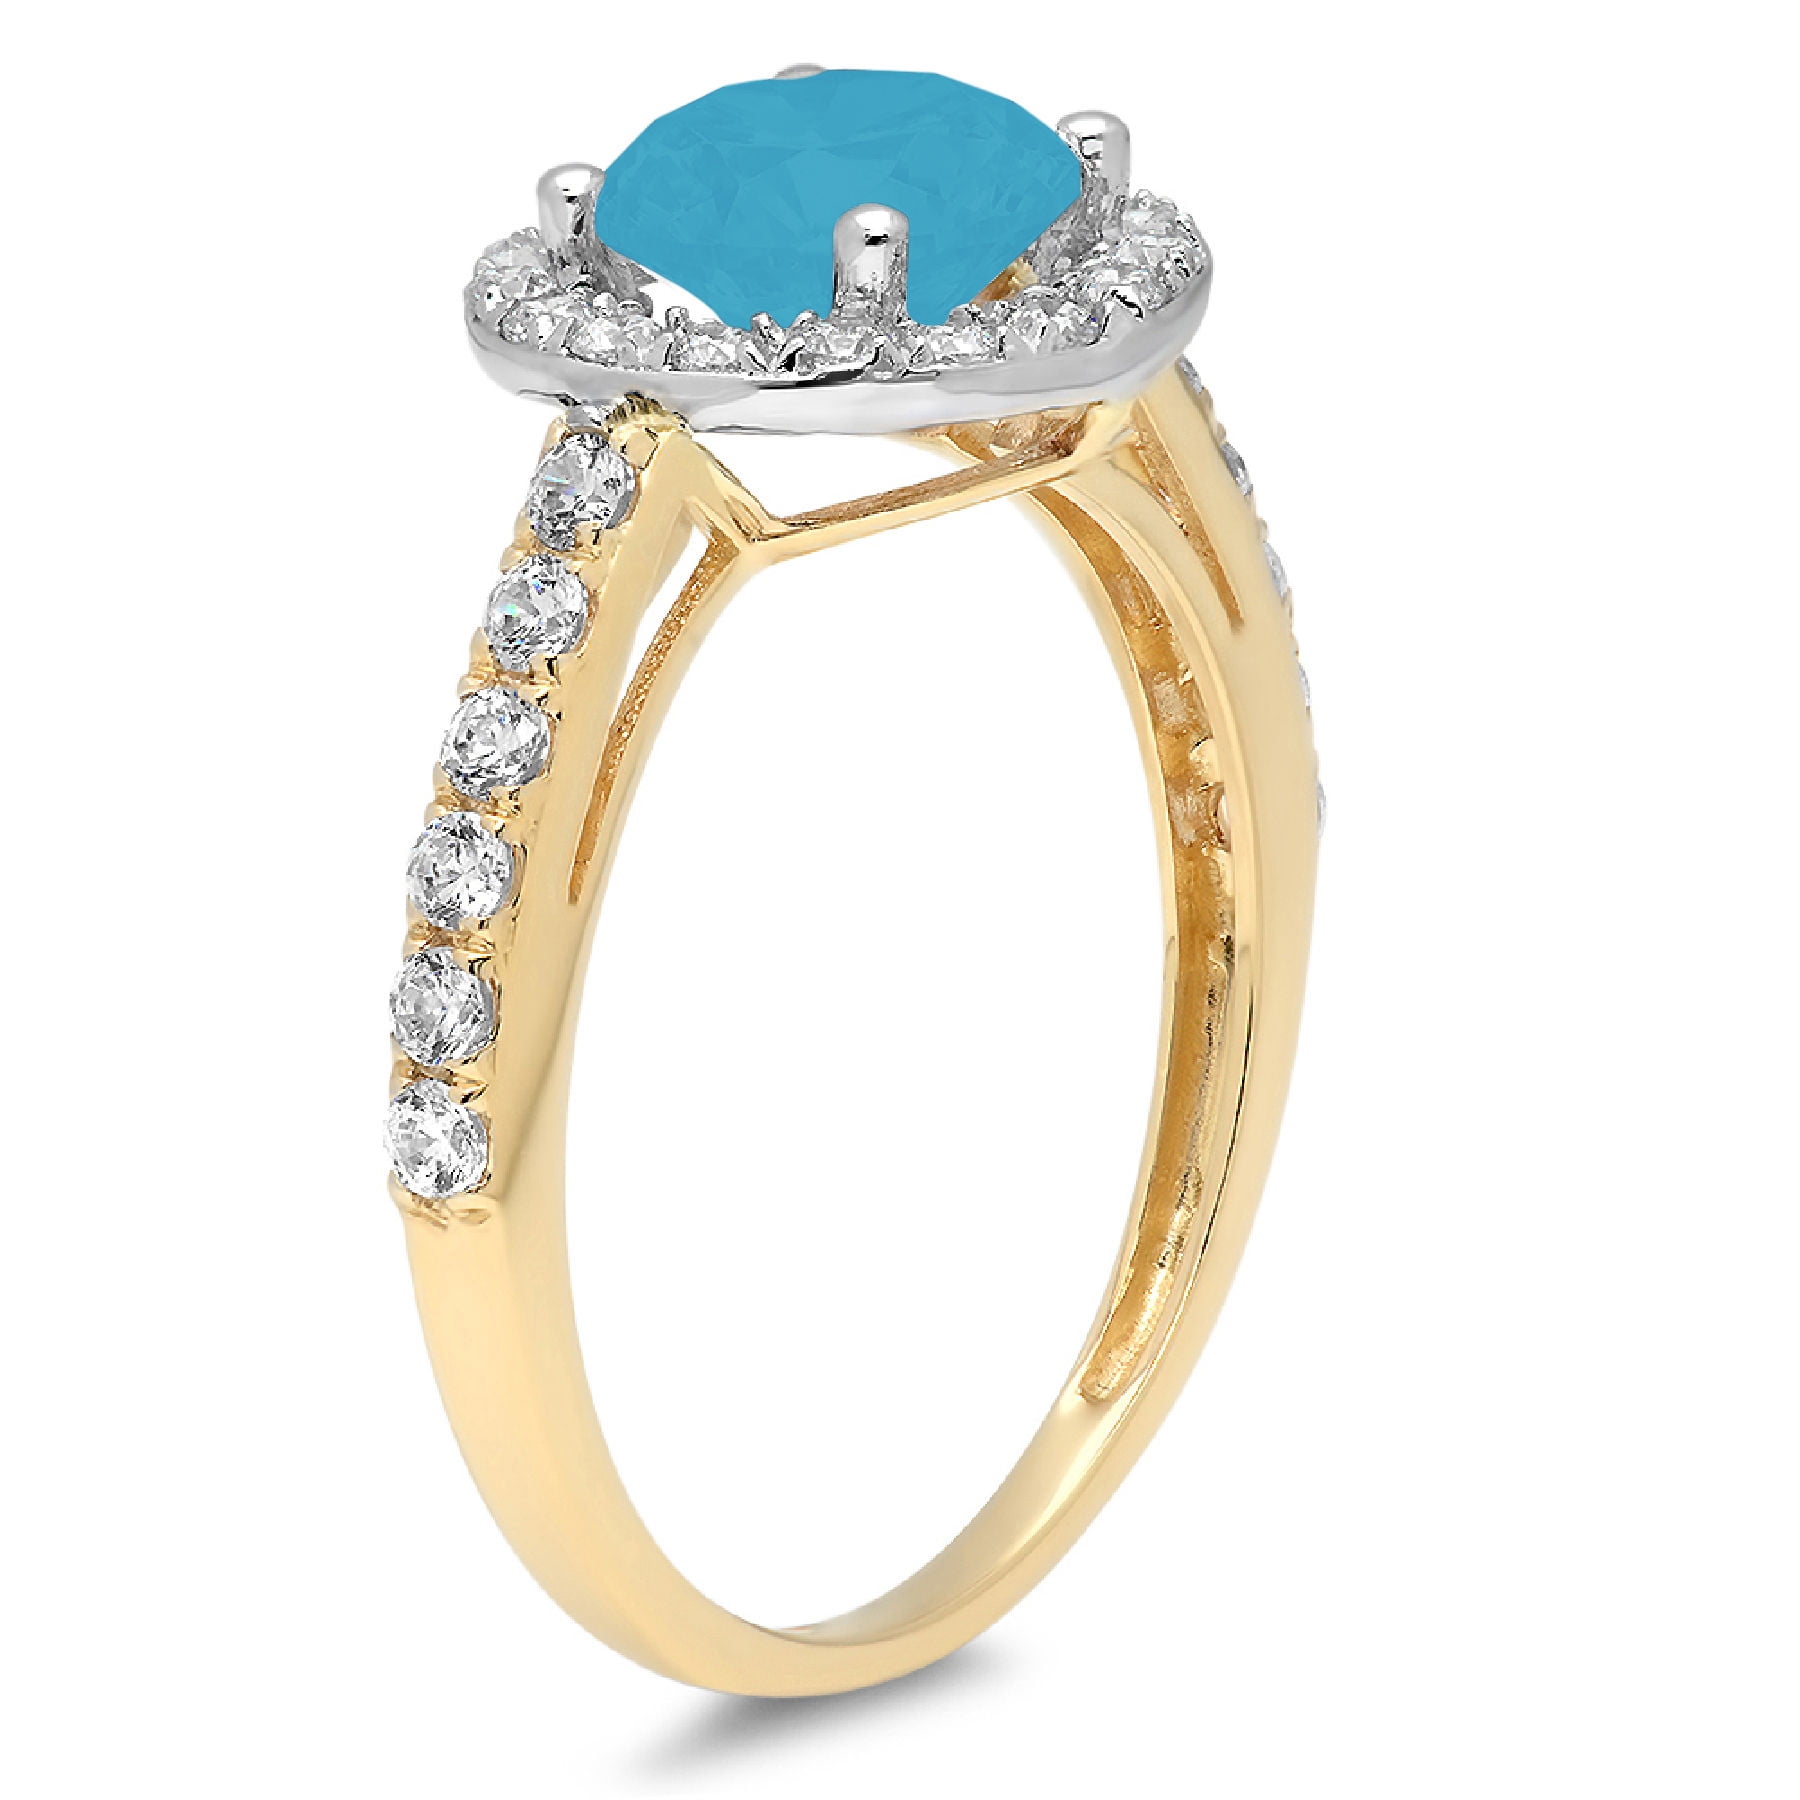 2.37 ct Brilliant Round Cut VVS1 Simulated Turquoise White Solid 14k or 18k Gold Robotic Laser Engraved Halo Solitaire with Accents Ring